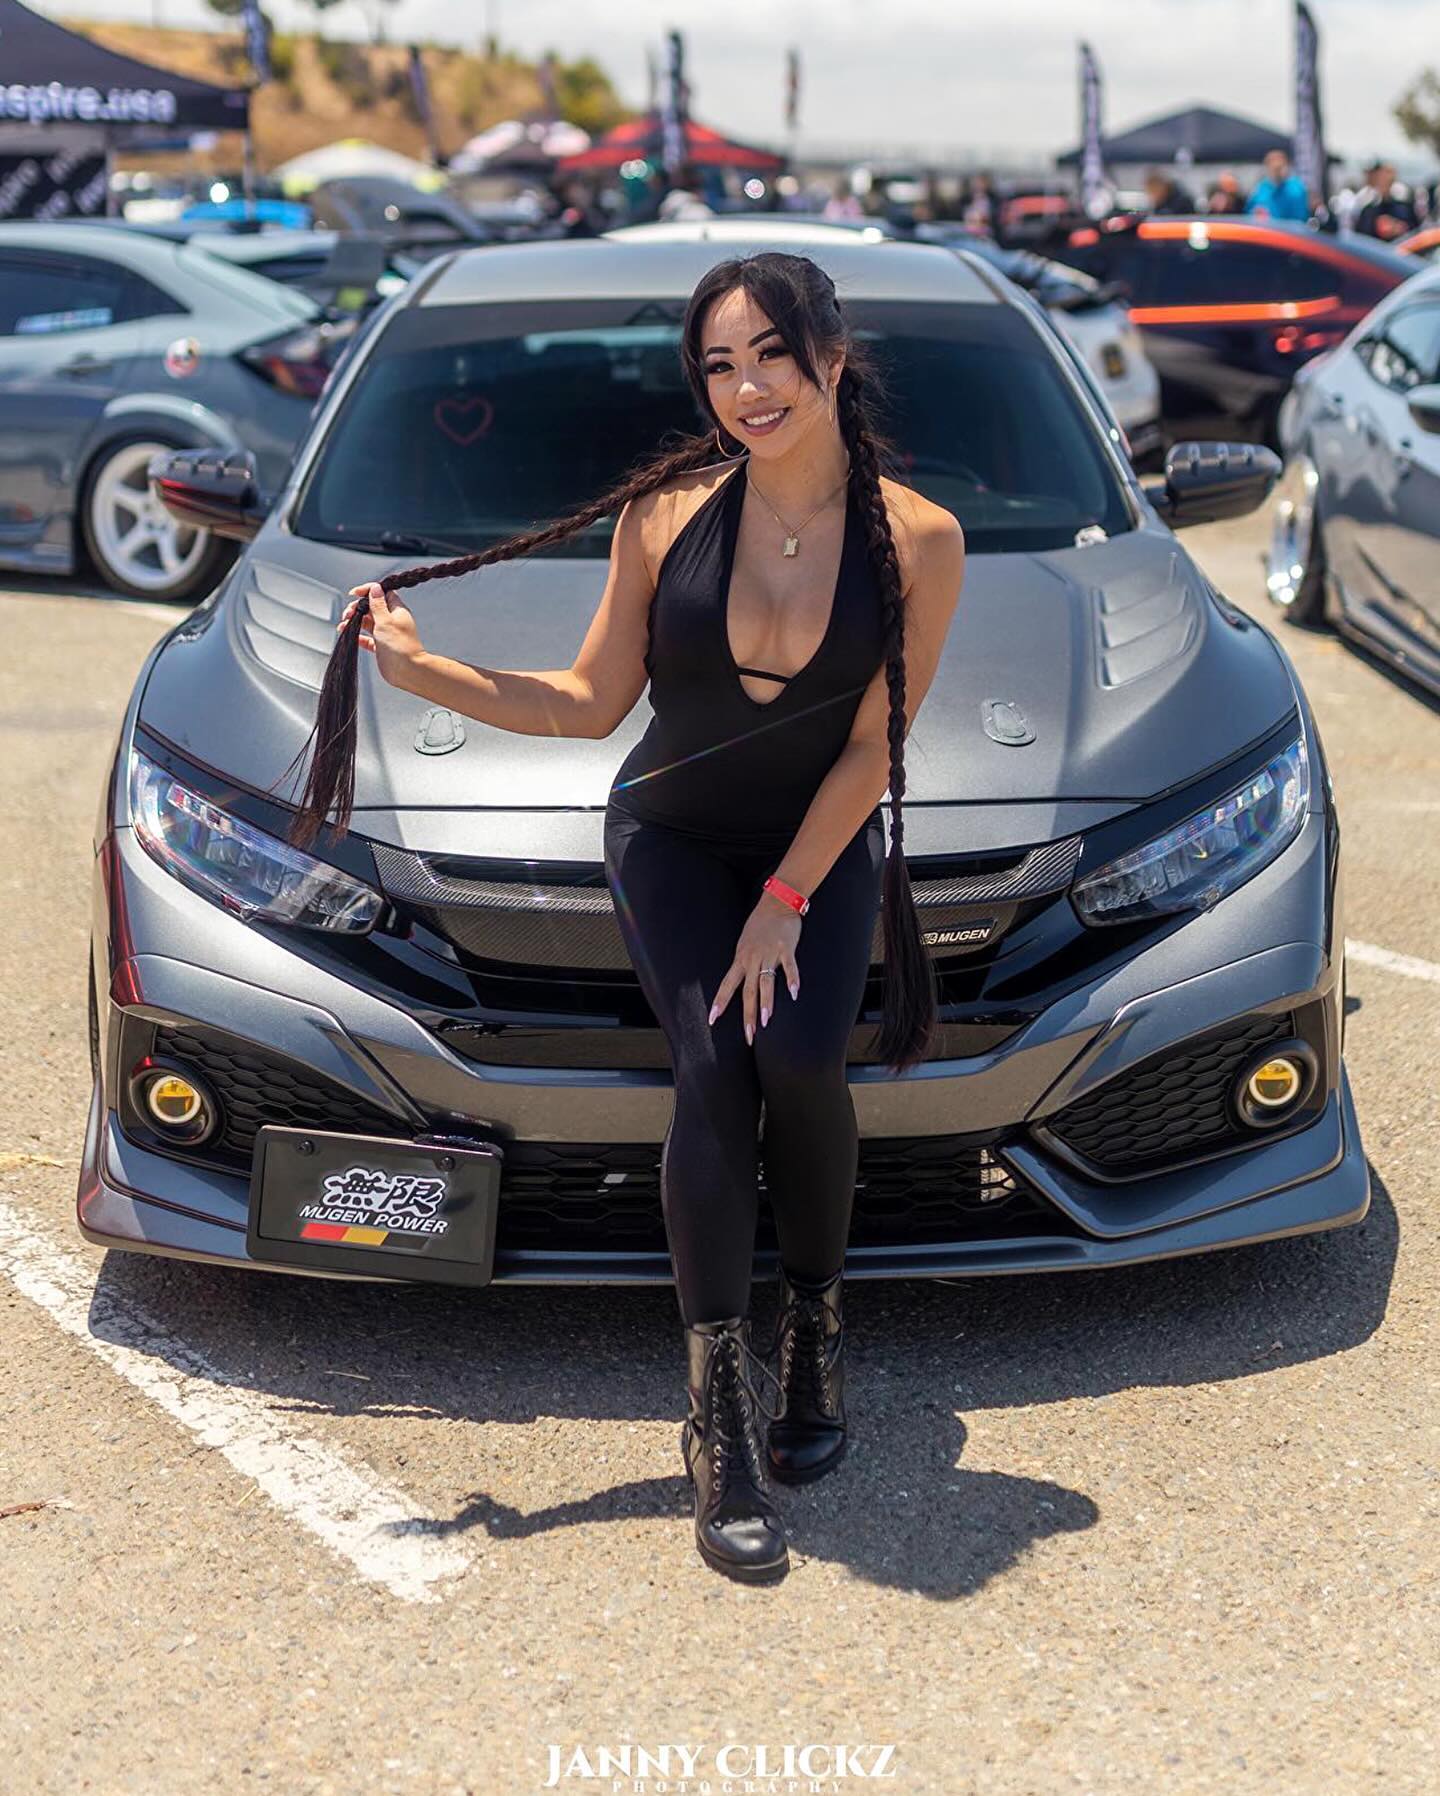 MUGEN POWER 🔥

Been awhile, guys! Missed me? I stg if this weather doesn’t warm up soon I’m visiting my 500+ relatives in the Philippines LMAO

📸 @janny.clickz
📍 @spocom SF
🚘 @isongil